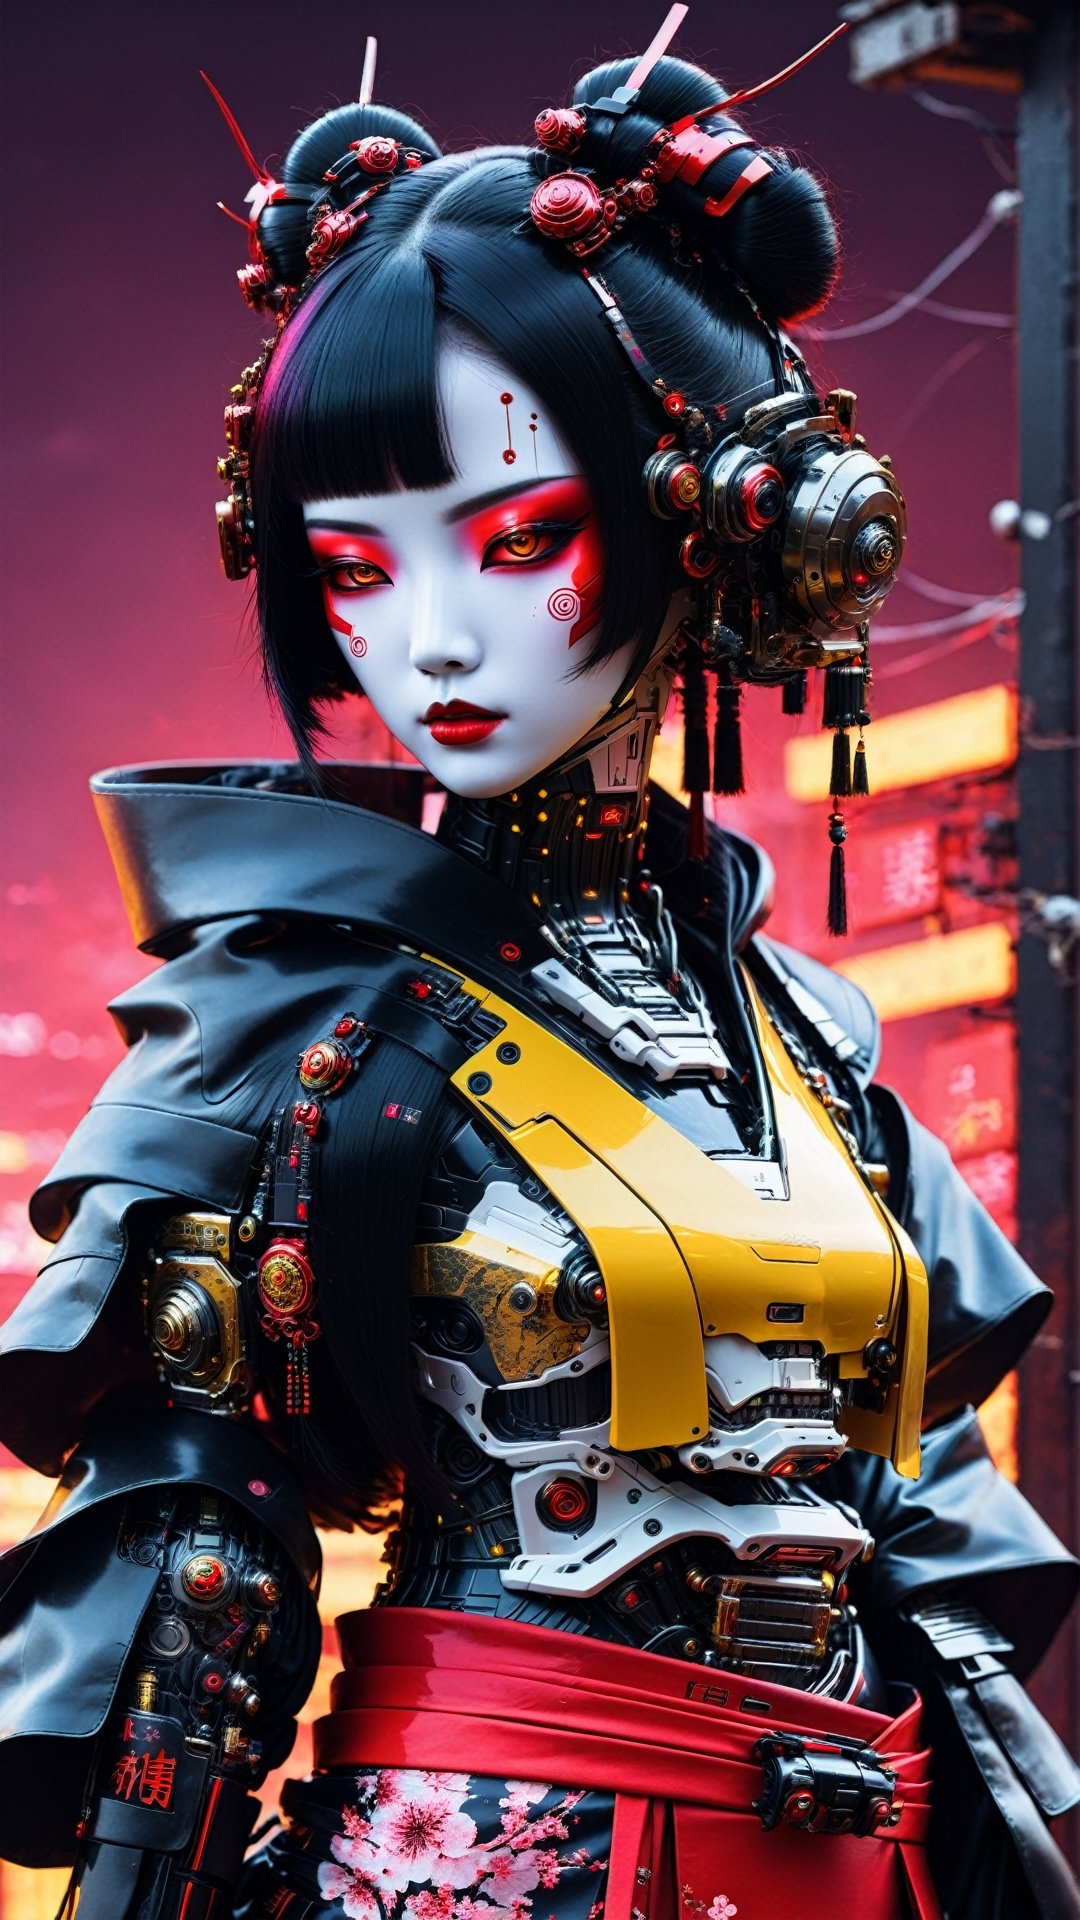 lethal geisha cyborg assassin wearing hooded kimono & armor, danger, red-yellow sky, post apocalyptic art, neon horror, sci-fi, glitchcore, cgsociety, modern european ink painting, androgynous, mixed media, dystopian art, black and Neon cosmic art, analog horror, nightmarefuel, space punk, glitchcore, hauntingly beautiful, beautifully ominous. A world class female cyborg in stunning HD, world class art, unique, modern masterpiece, exceptional, exquisite, dark fantasy, apocalypse art, calotype